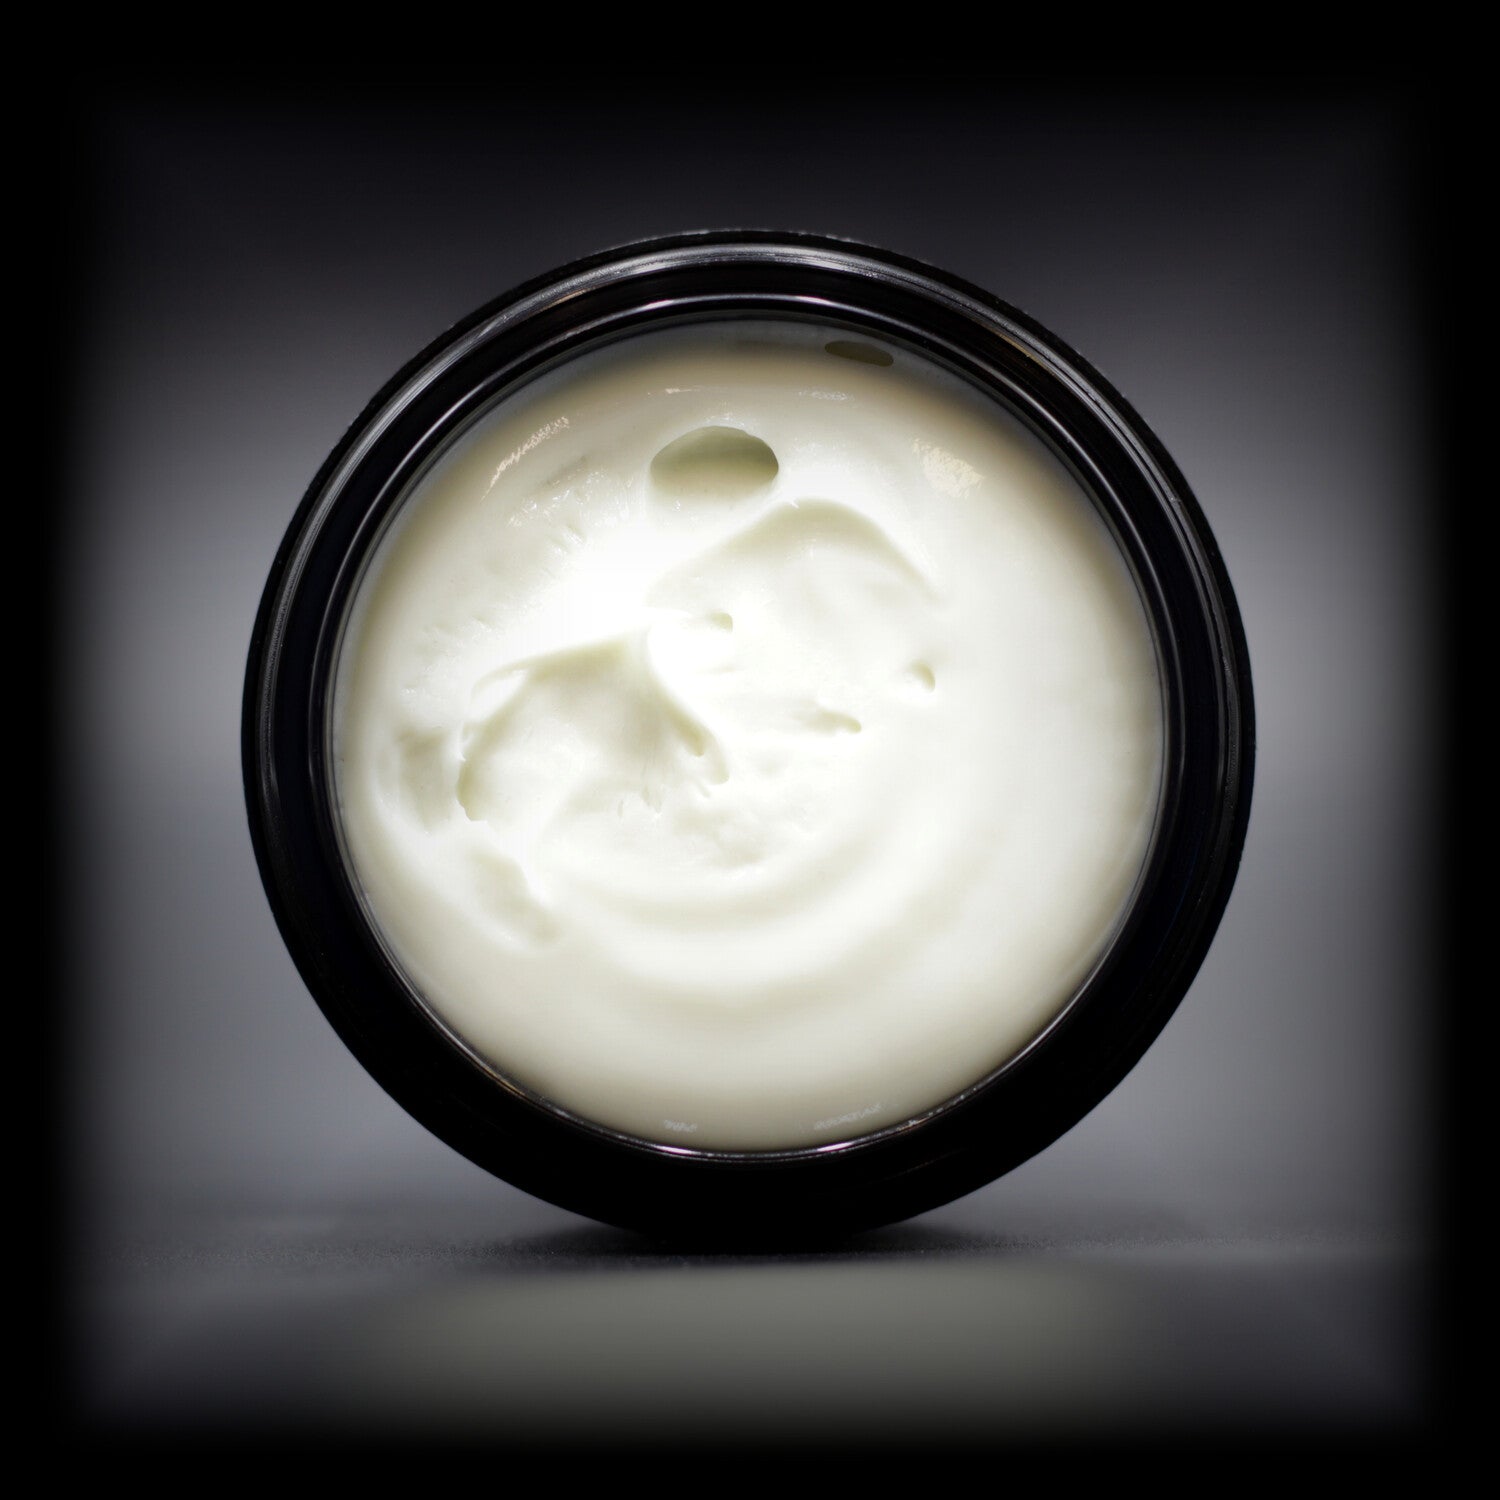 Naturally Wicked Mystic Mint Hand & Foot Butter Exposed Within Luxury Black Container